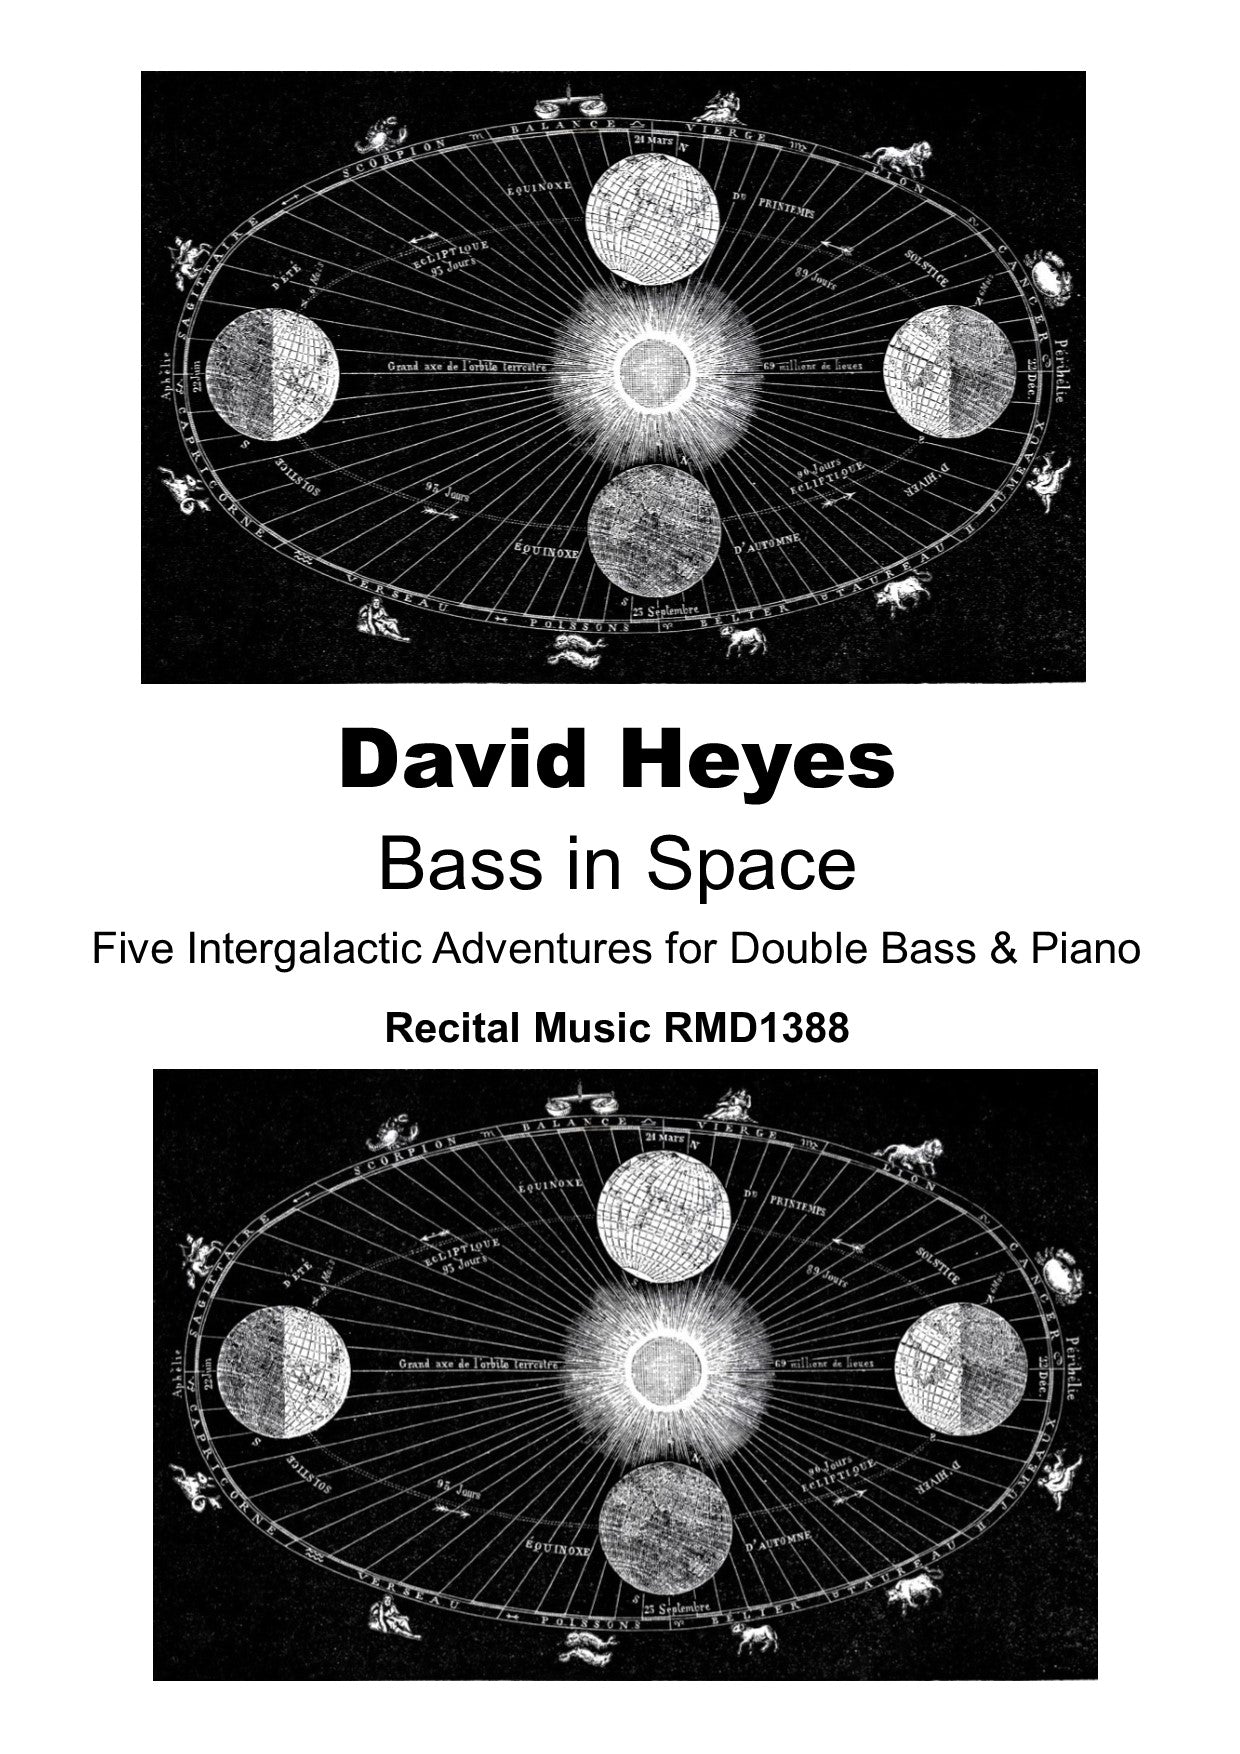 David Heyes: Bass in Space: Five Intergalactic Adventures for double bass & piano